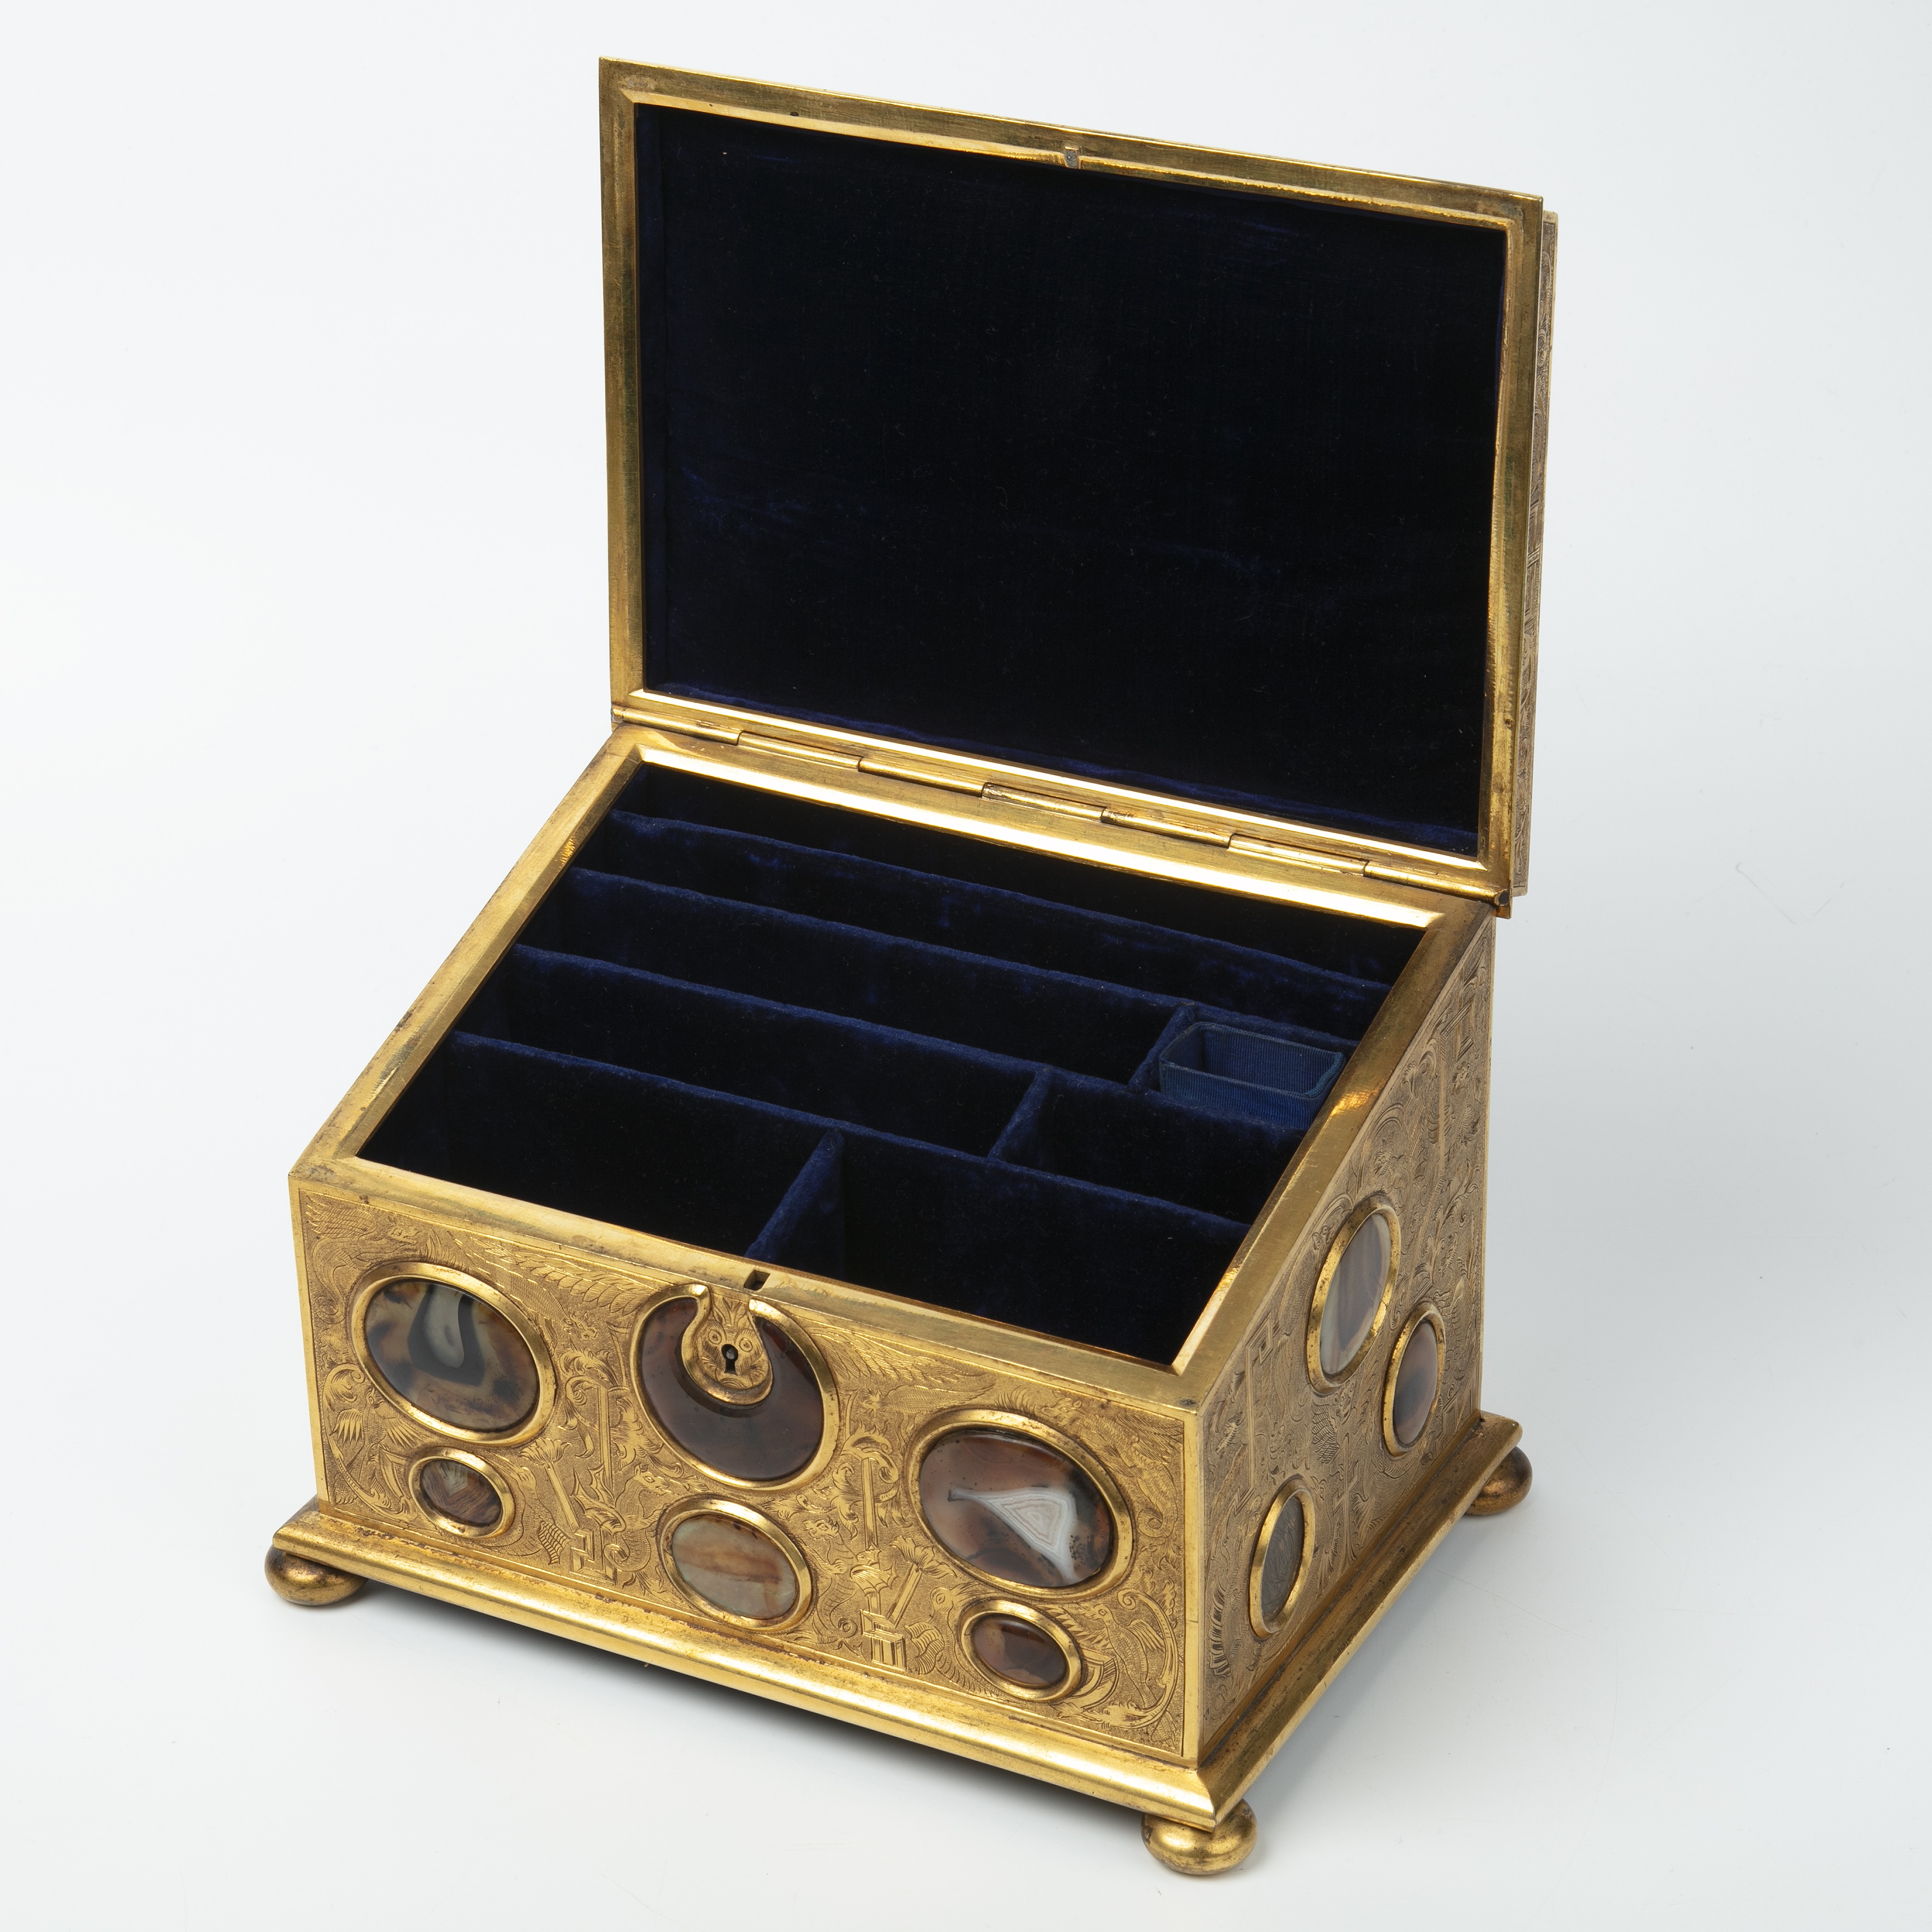 A 19th century correspondence gilt box with engraved decoration and inset cabochon stones hardstones - Image 4 of 25